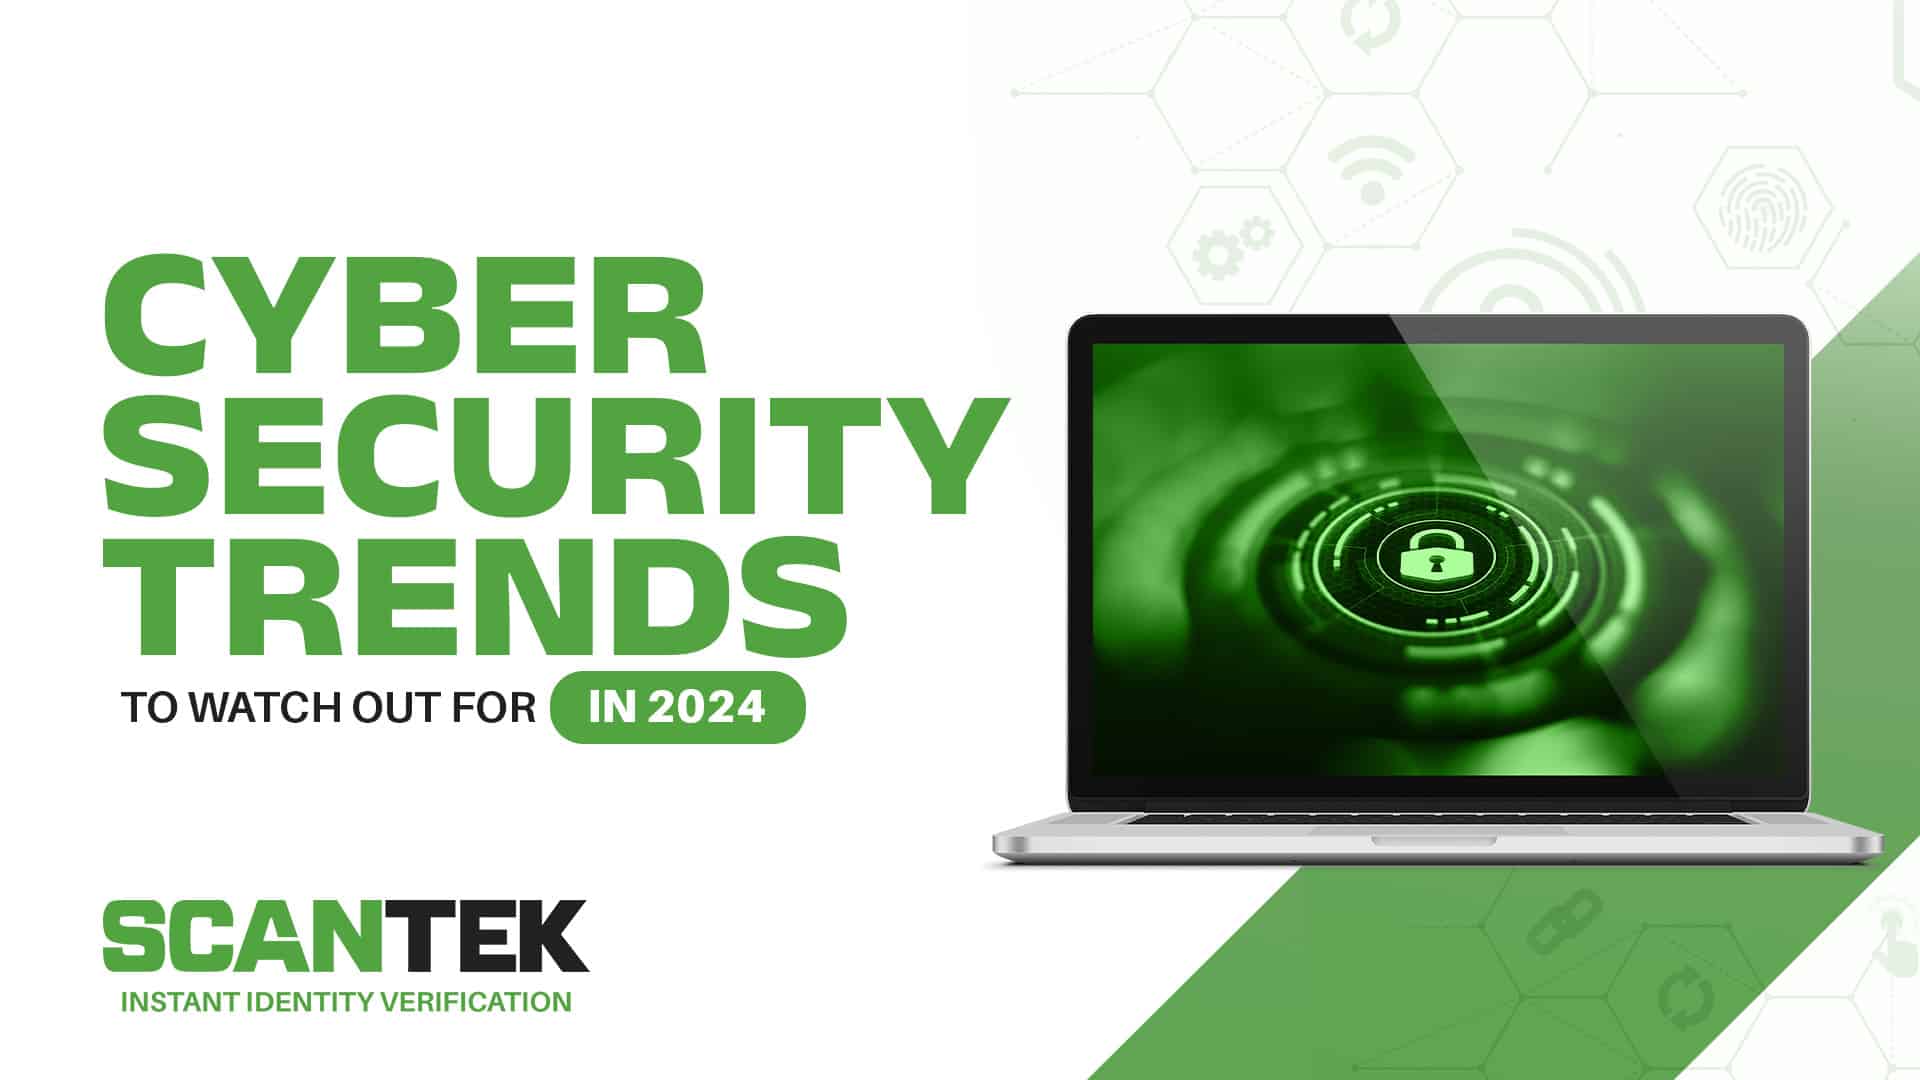 Scantek Cybersecurity Trends to Watch Out for in 2024